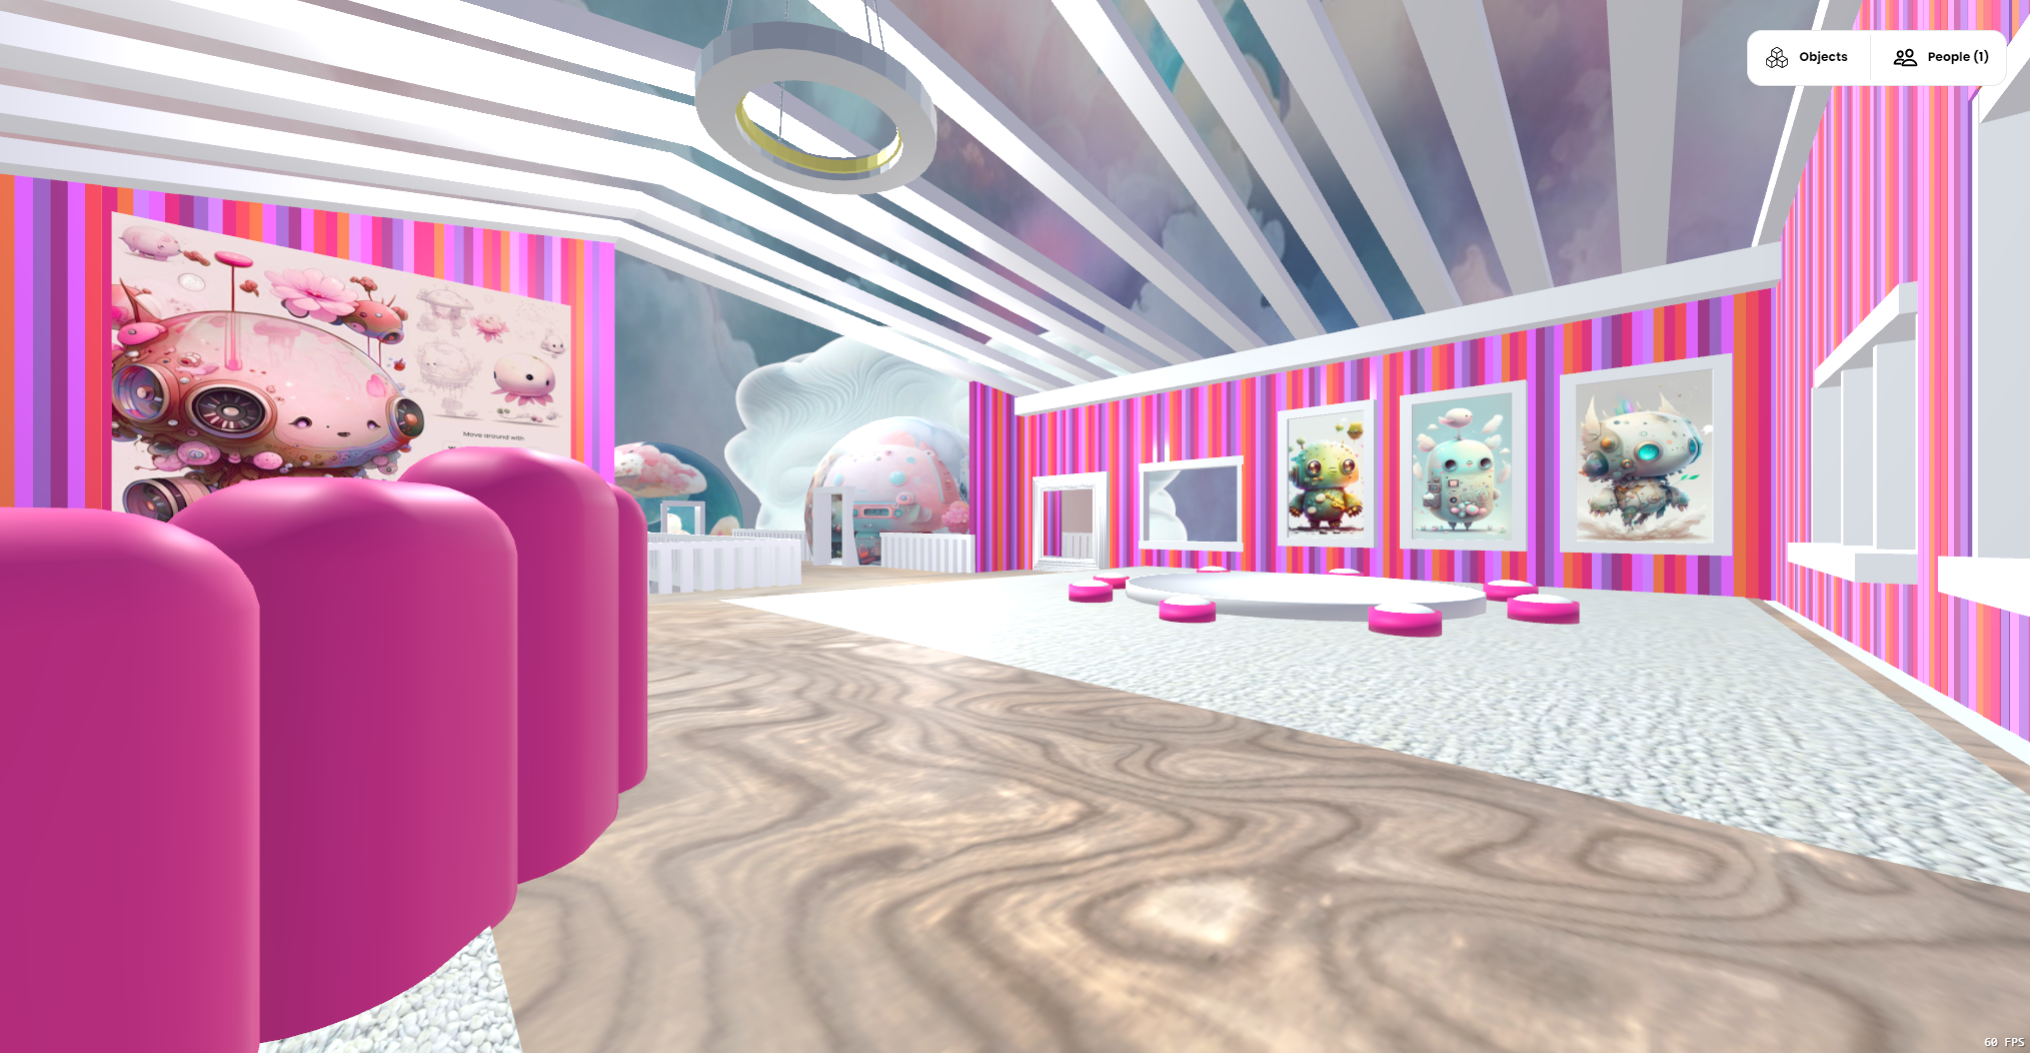 First impression of the Cloud Nine Beta space. It has pink striped walls and funky furniture.